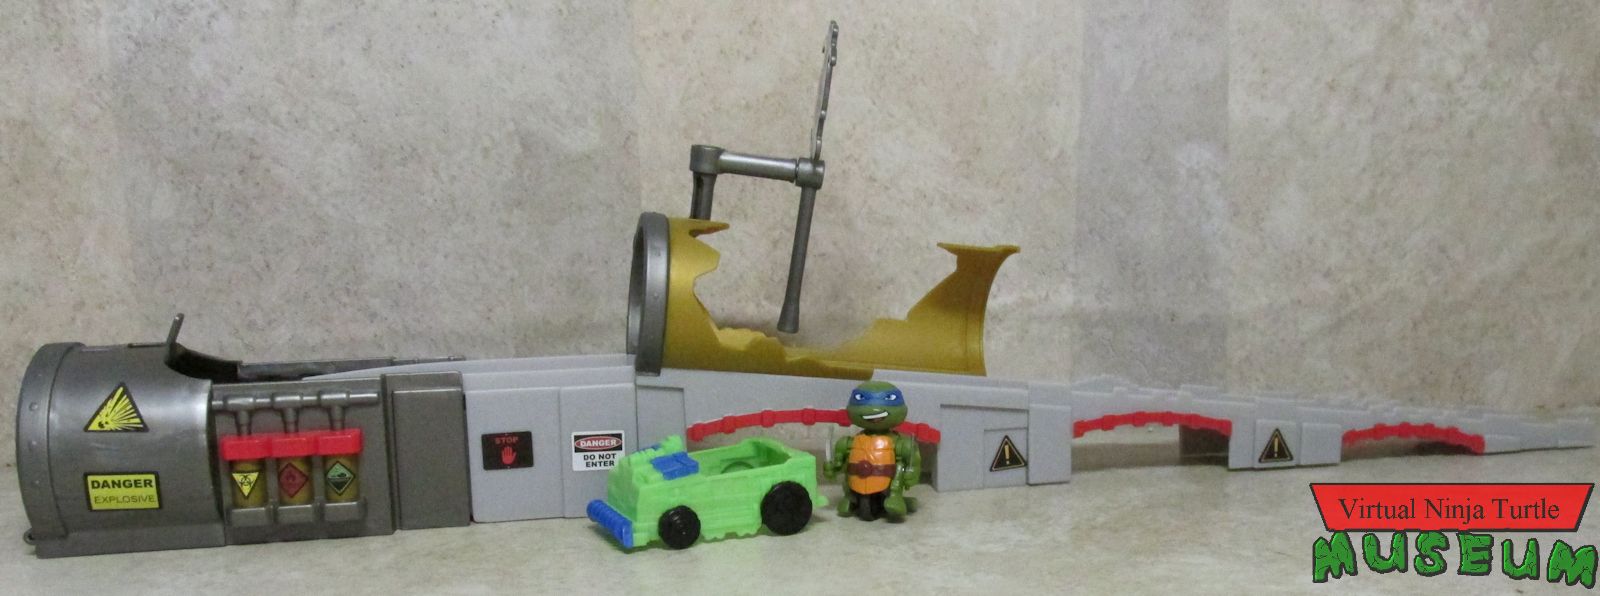 T-Sprints Sewer Duel Playset